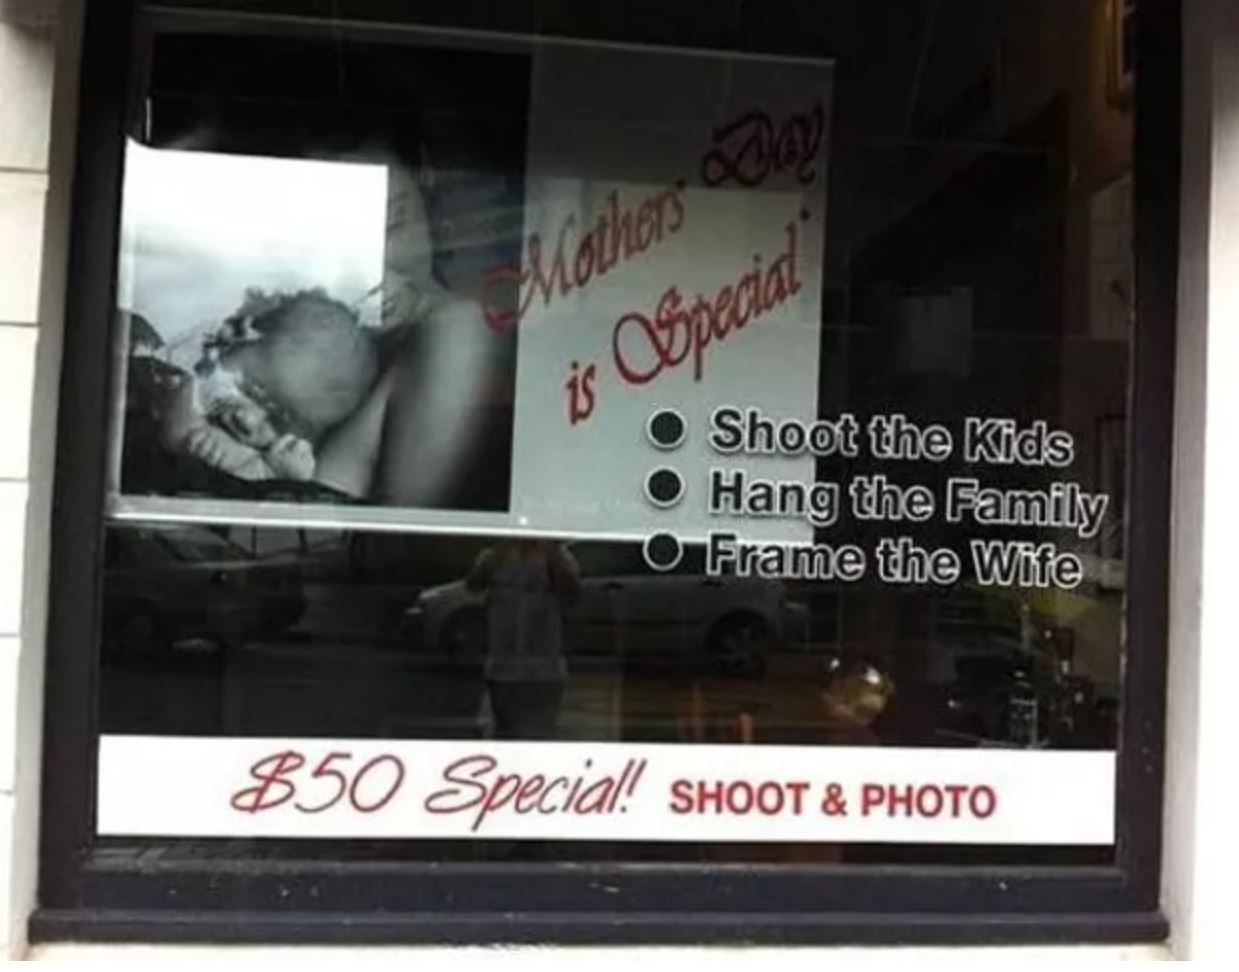 display advertising - Mother odlo is special Shoot the Kids Hang the Family O Frame the Wife 850 Special! Shoot & Photo